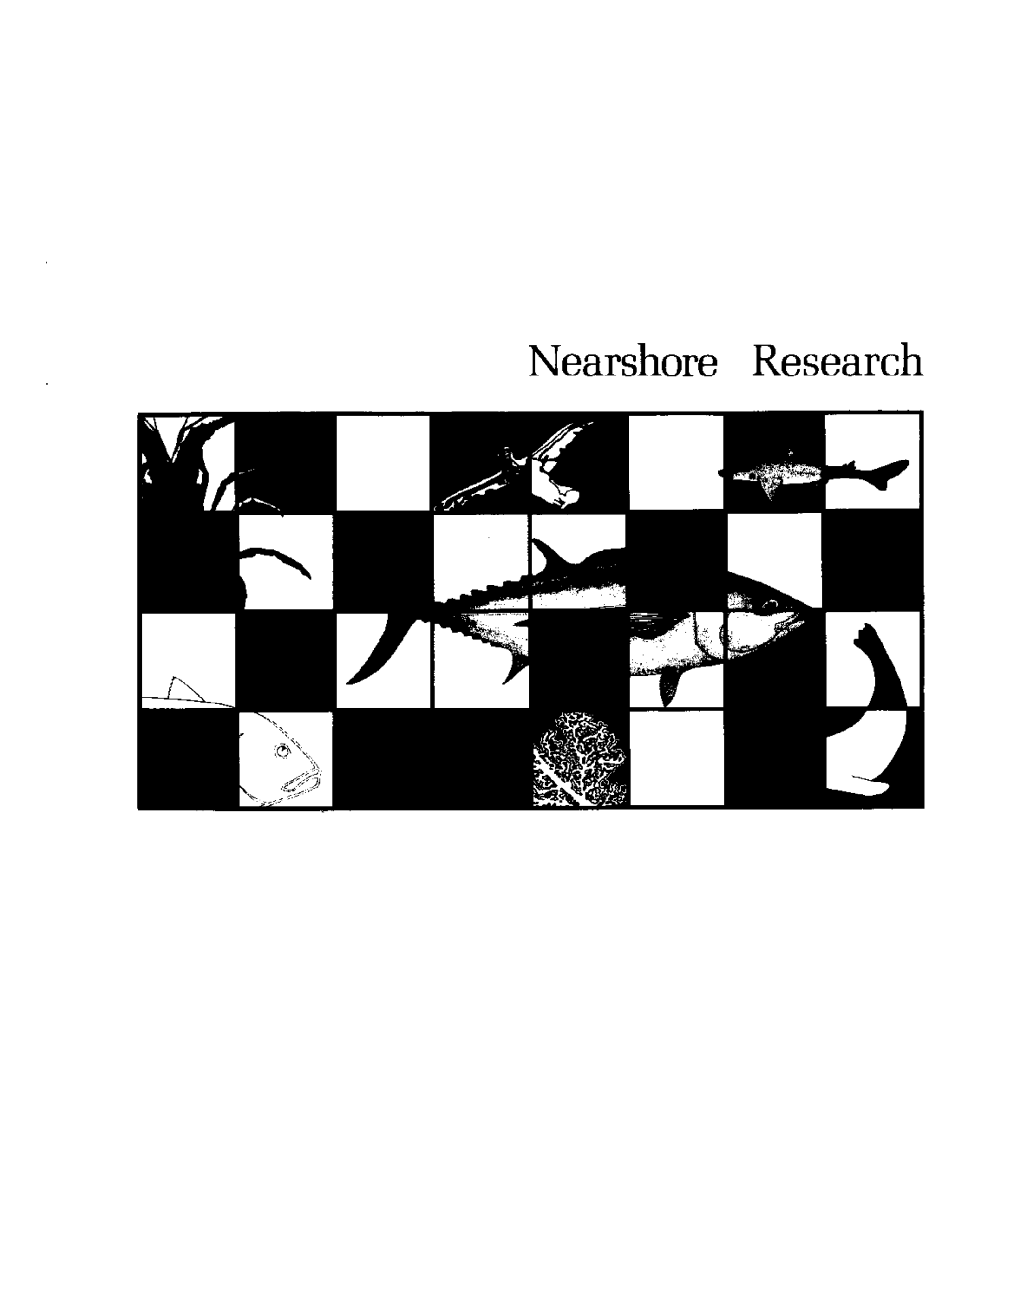 Nearshore Research